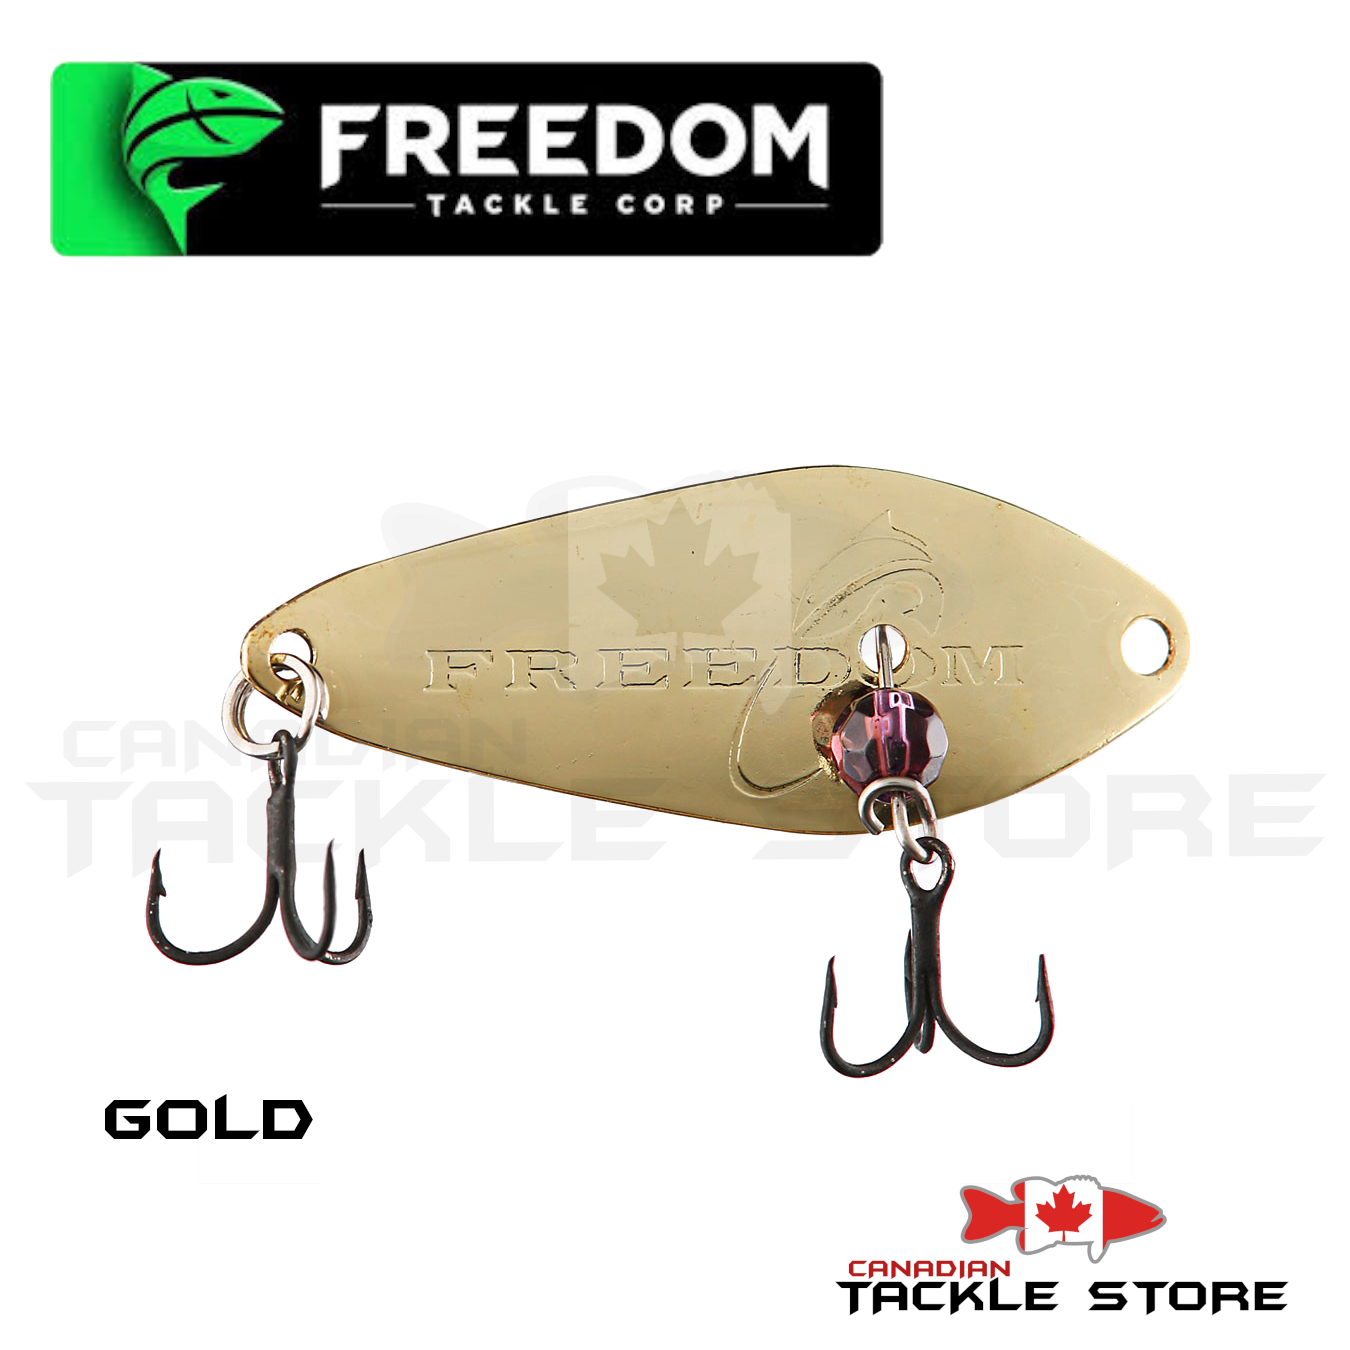 Roboworm Canada  Fishing Tackle Store